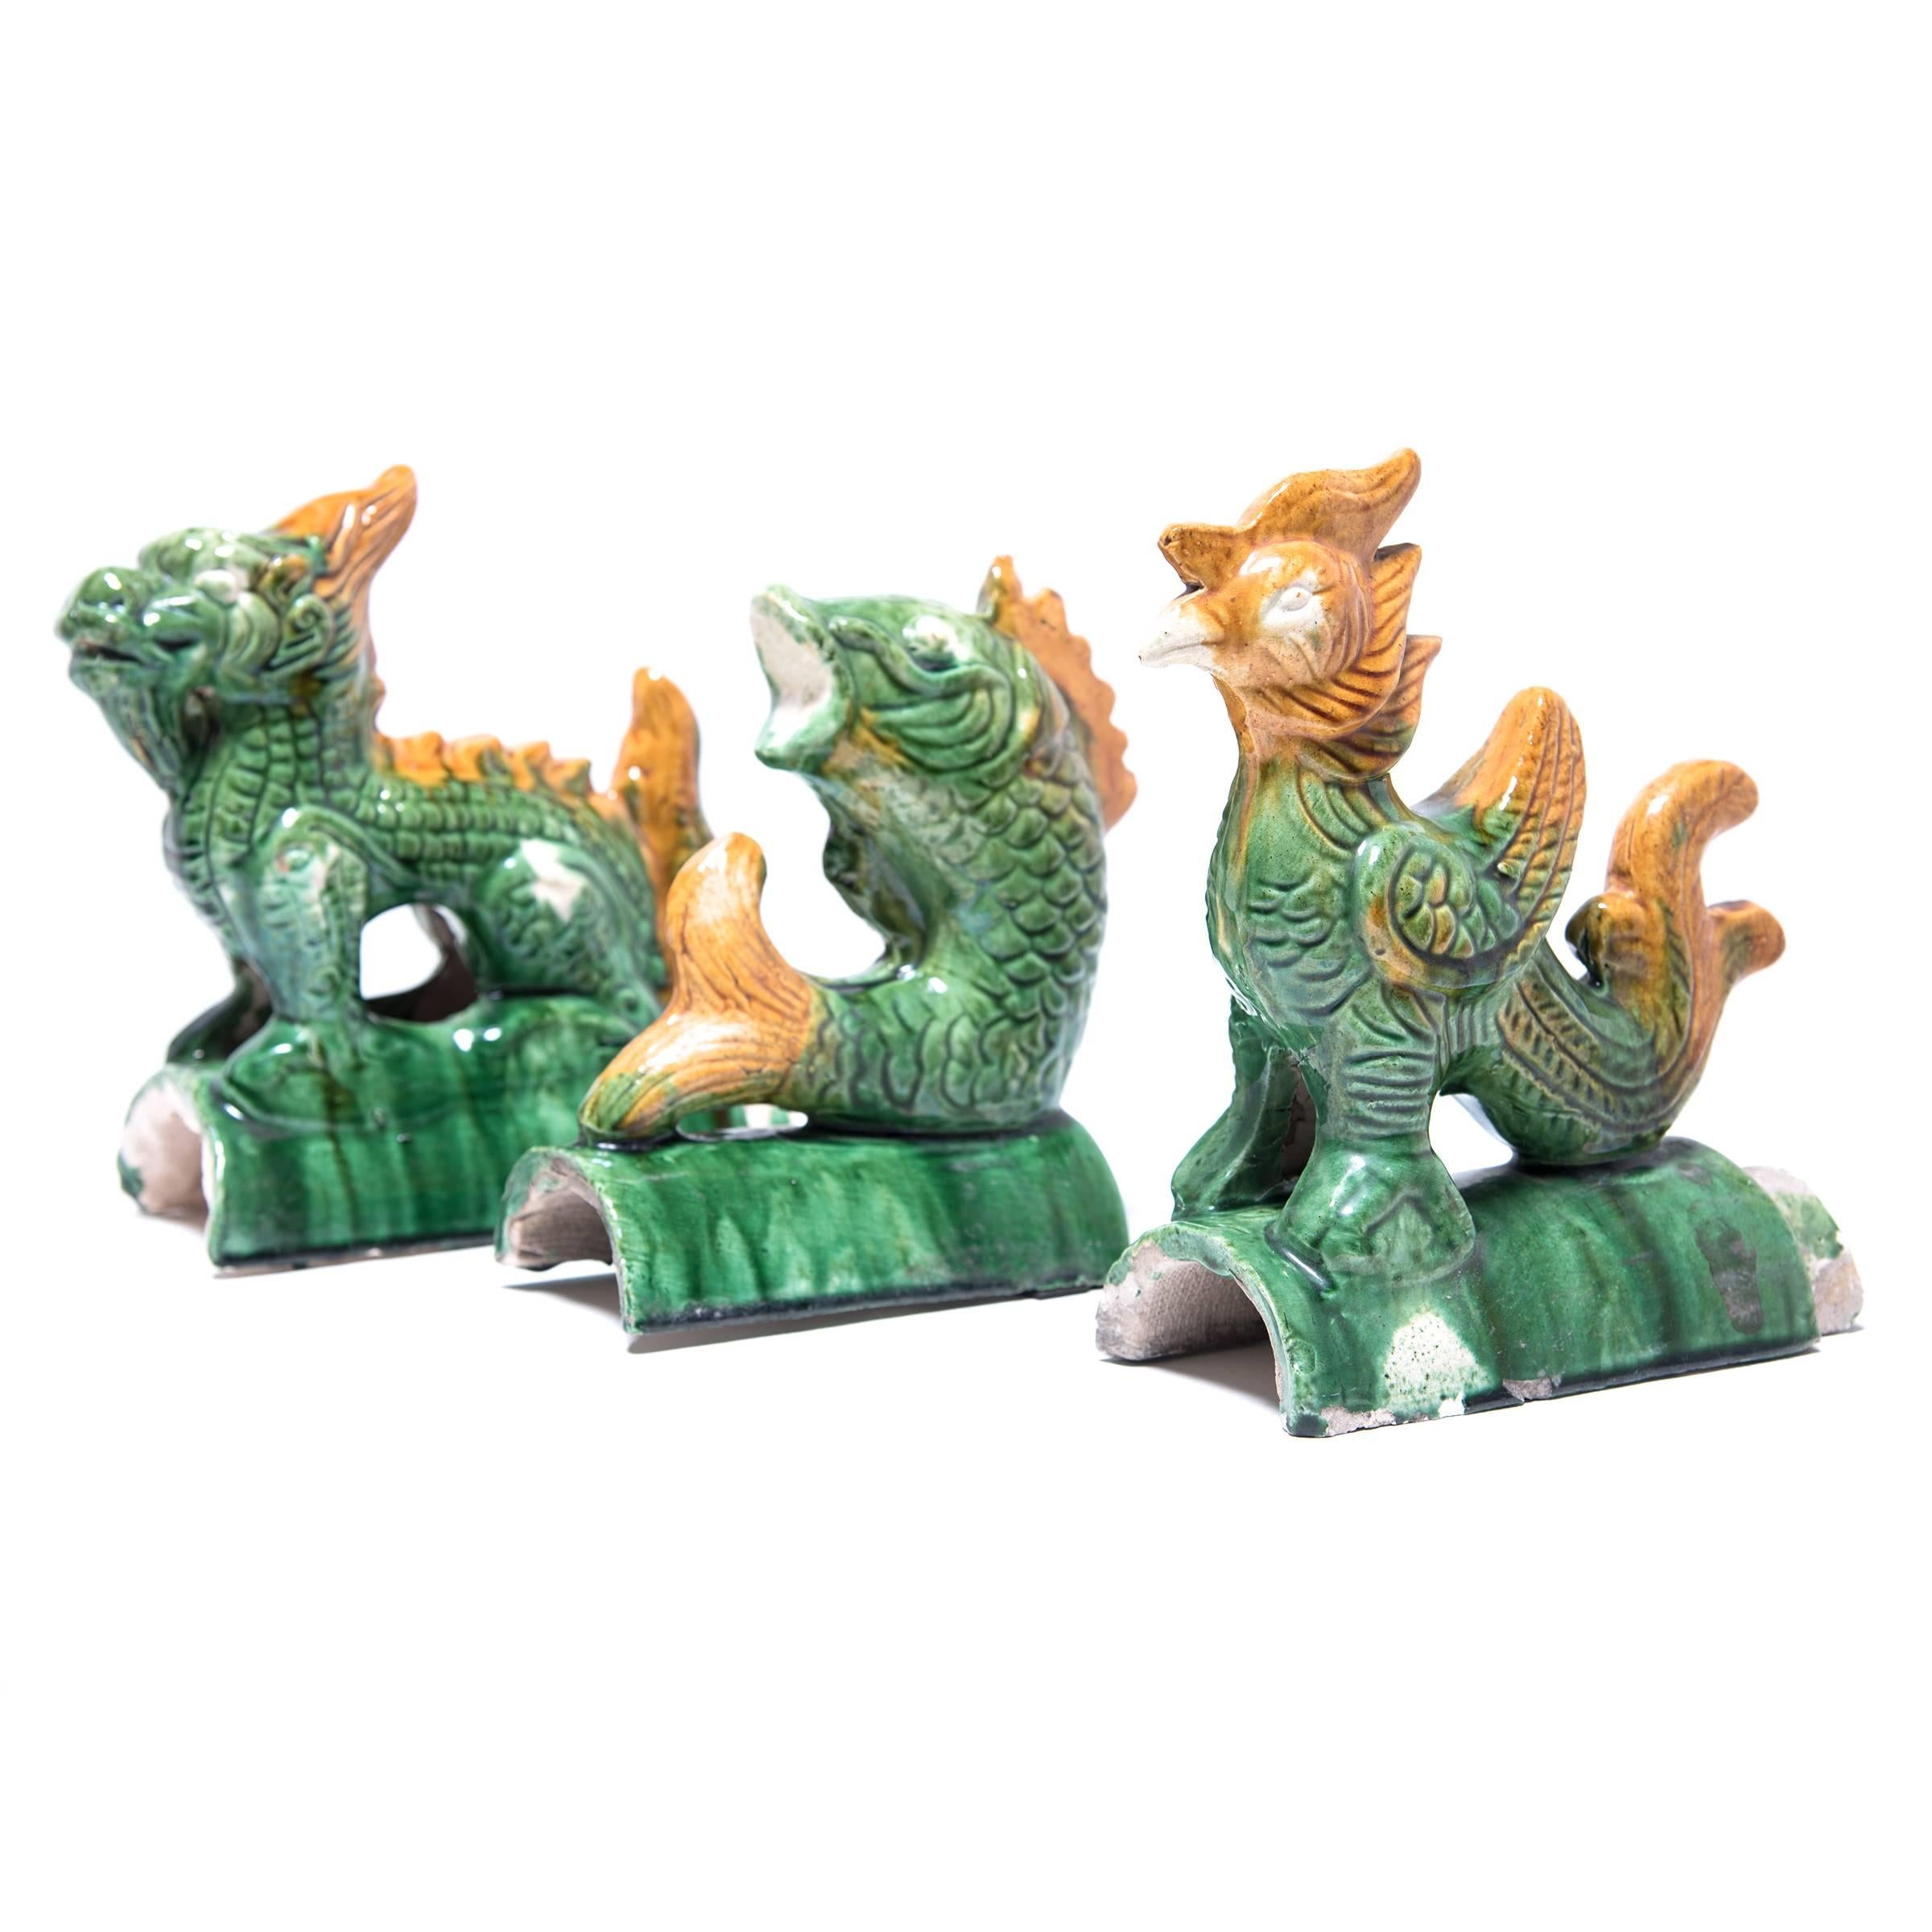 According to ancient Chinese belief, roofs held a place between the mortal and spirit worlds and so eaves and ridges were often decorated with gods, animals, or mythical beasts. These Celestial Roof Tiles depict an animated fish, a dragon and a